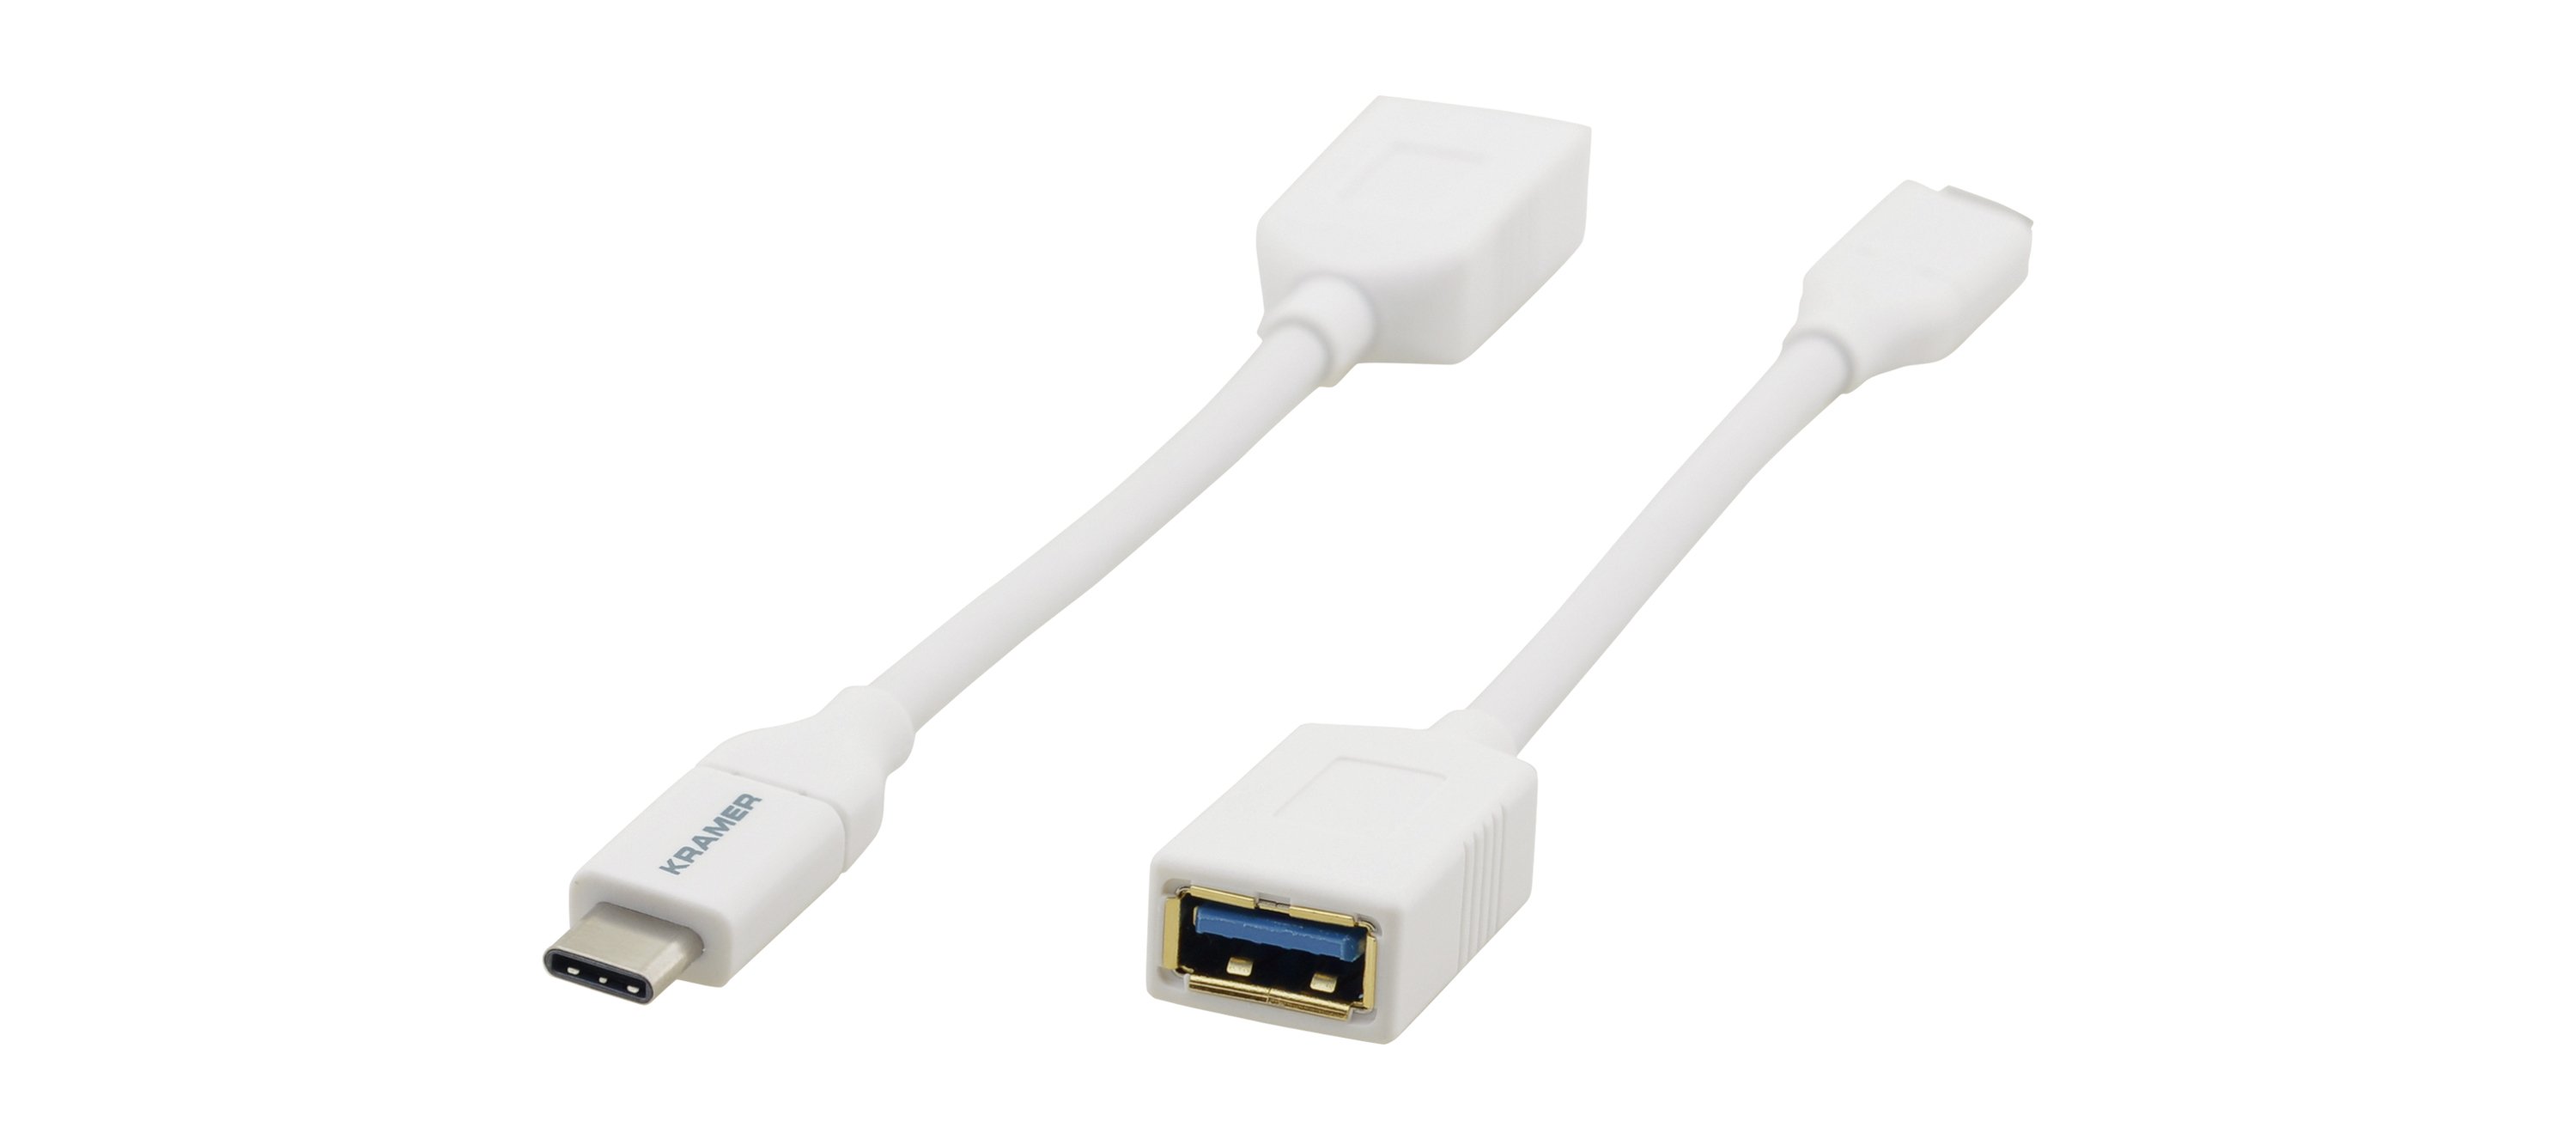 ADC-USB31/CAE USB 3.1 C(M) to A(F) Adapter Cable